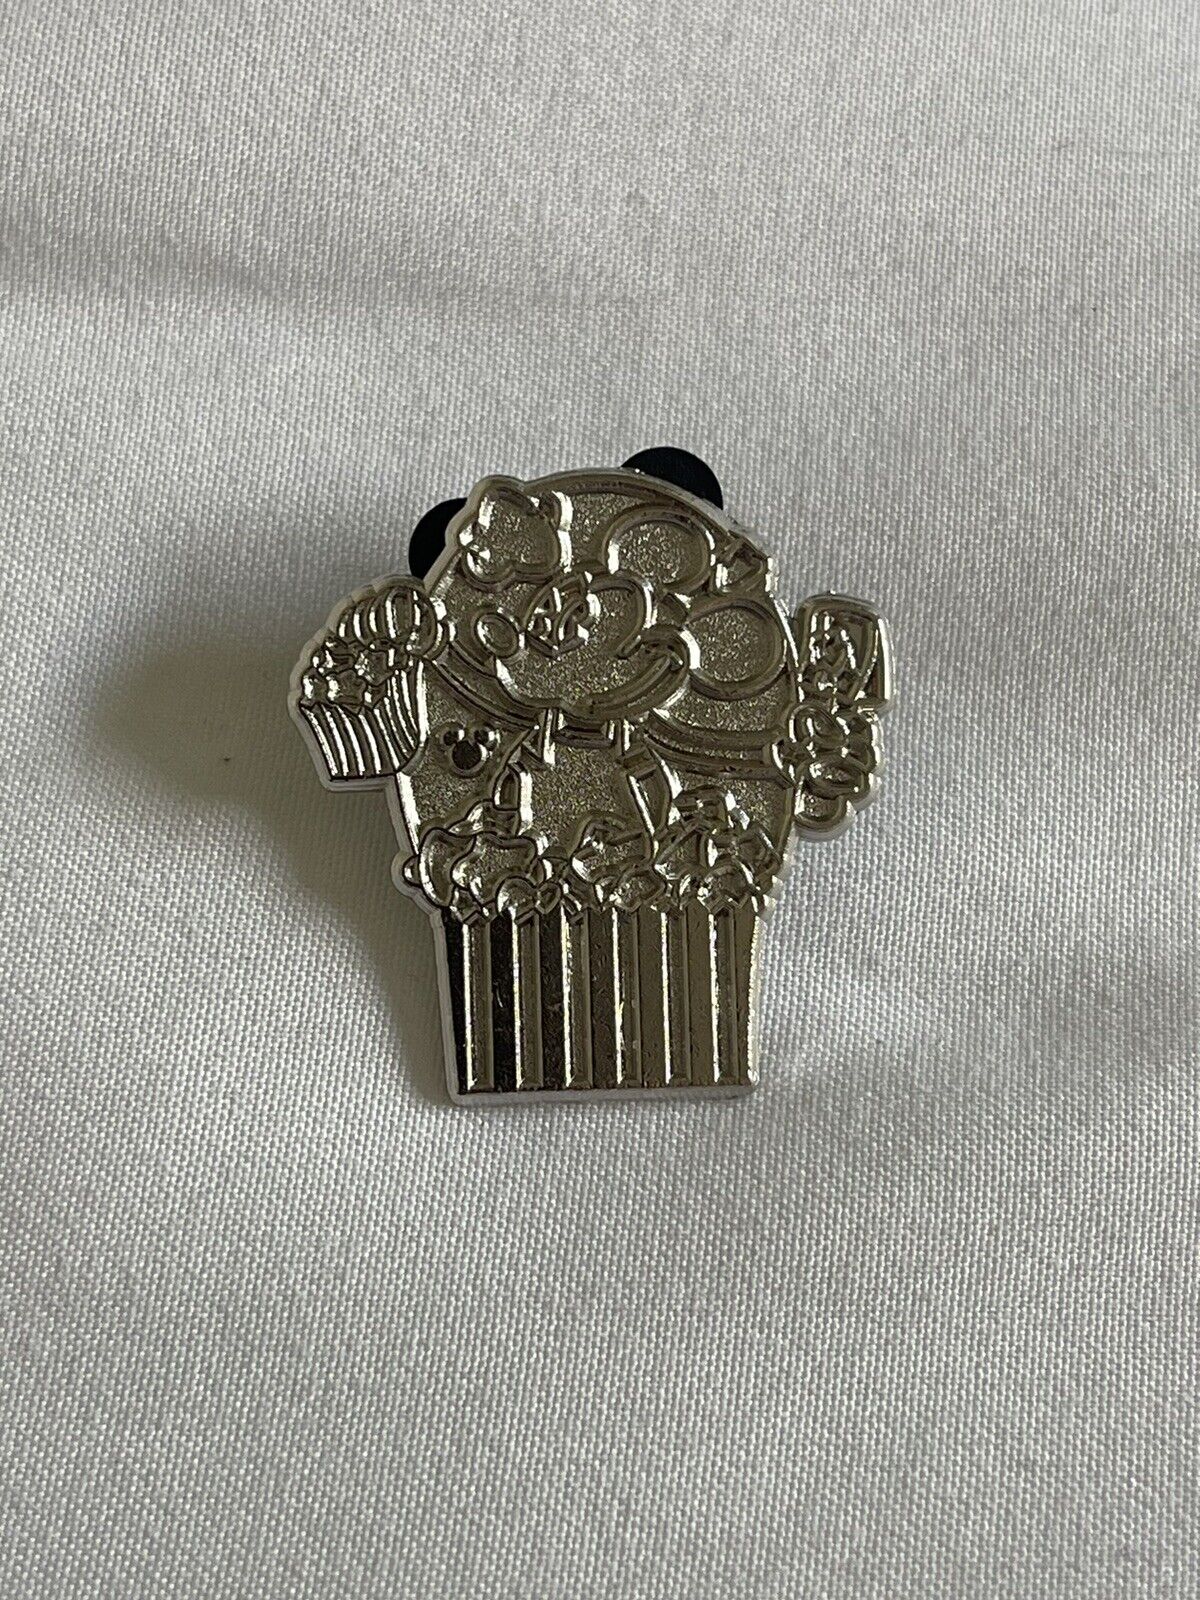 Disney Parks Trading Pins 2013 Hidden Mickey Mouse Popcorn Chaser DLR Character